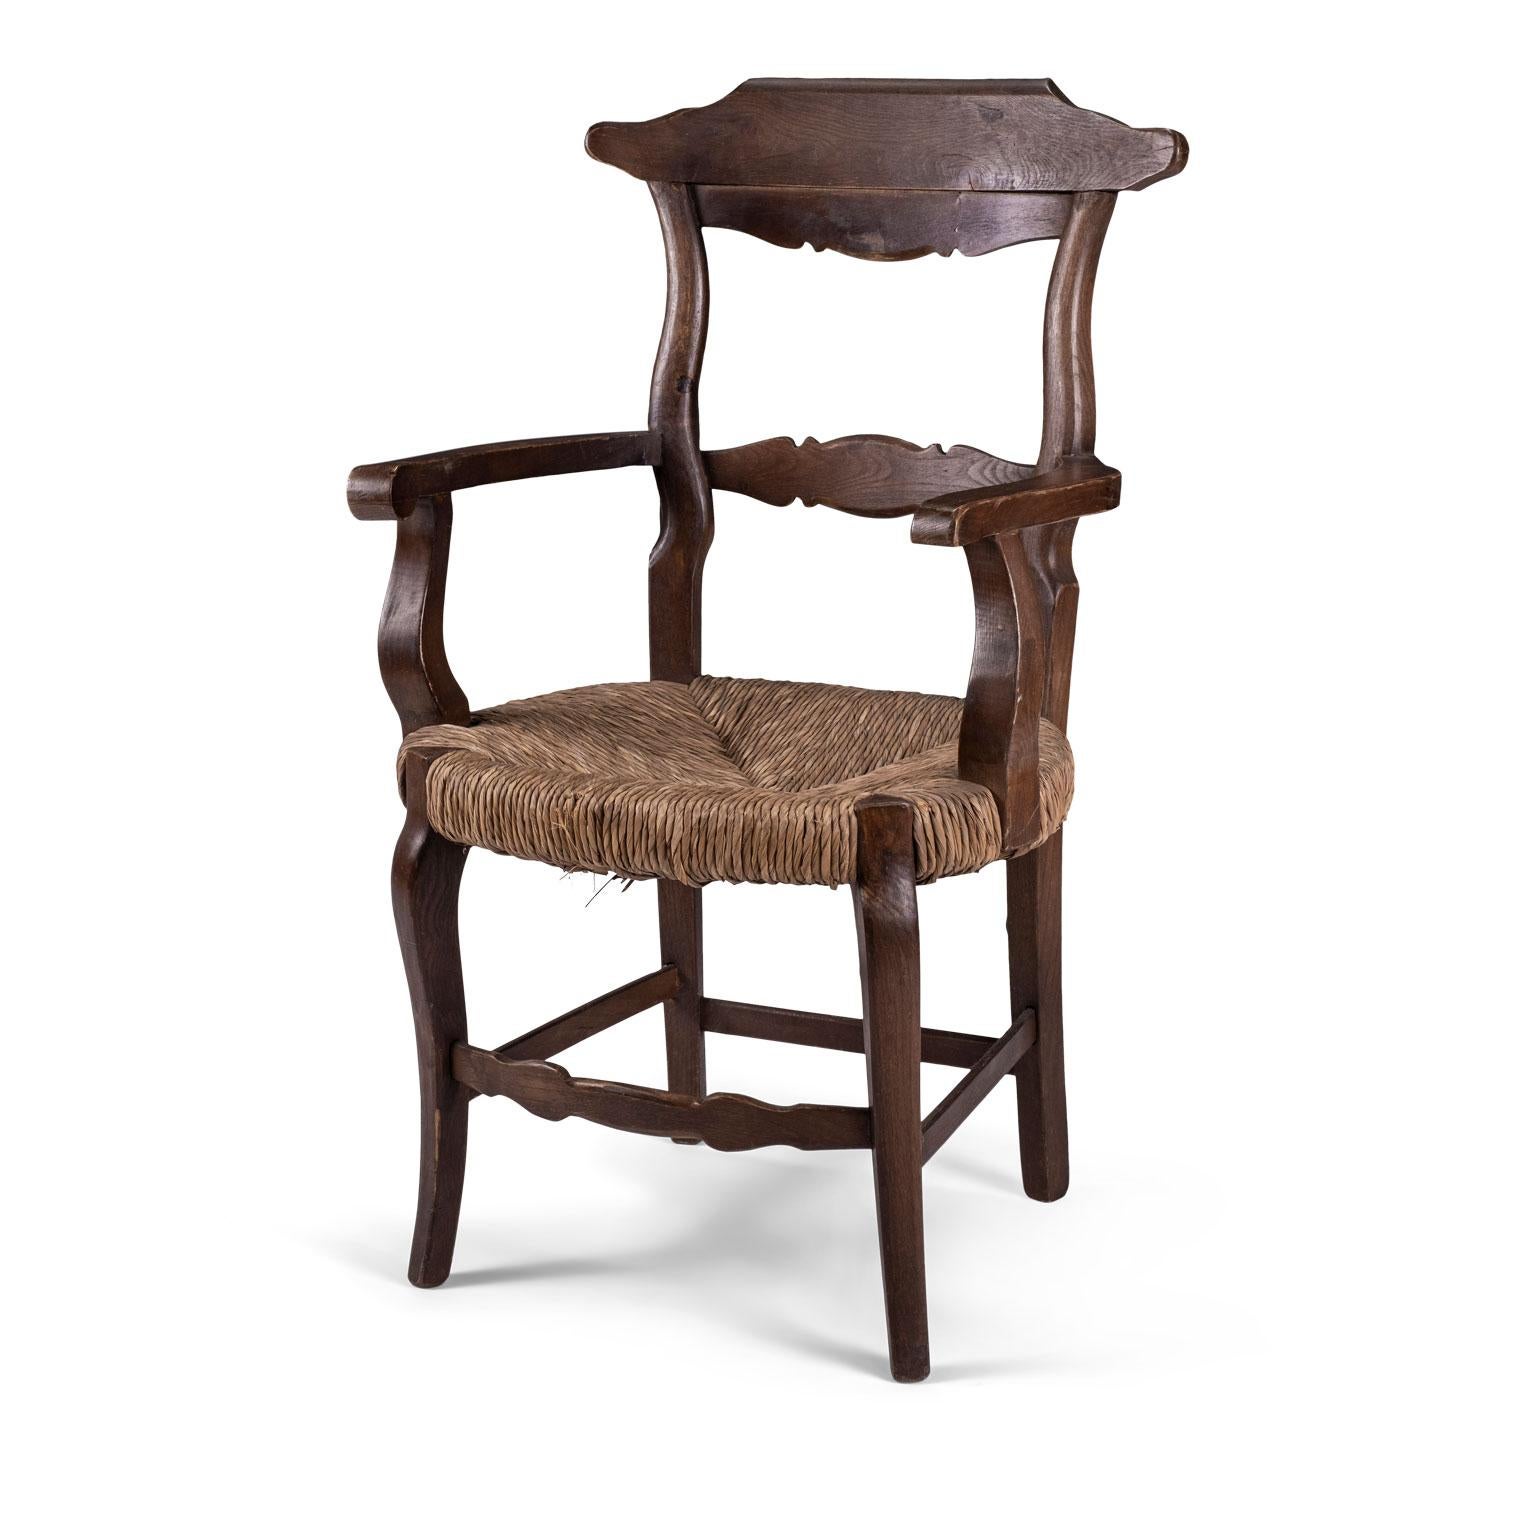 Large scale rustic rush-seat French chair, circa 1920-1950. Generous proportions with wide original rush seat. Well-made, comfortable and sturdy. Seat measures: 18 inches high x 18 inches wide x 20 inches deep and arms are 27 inches high.